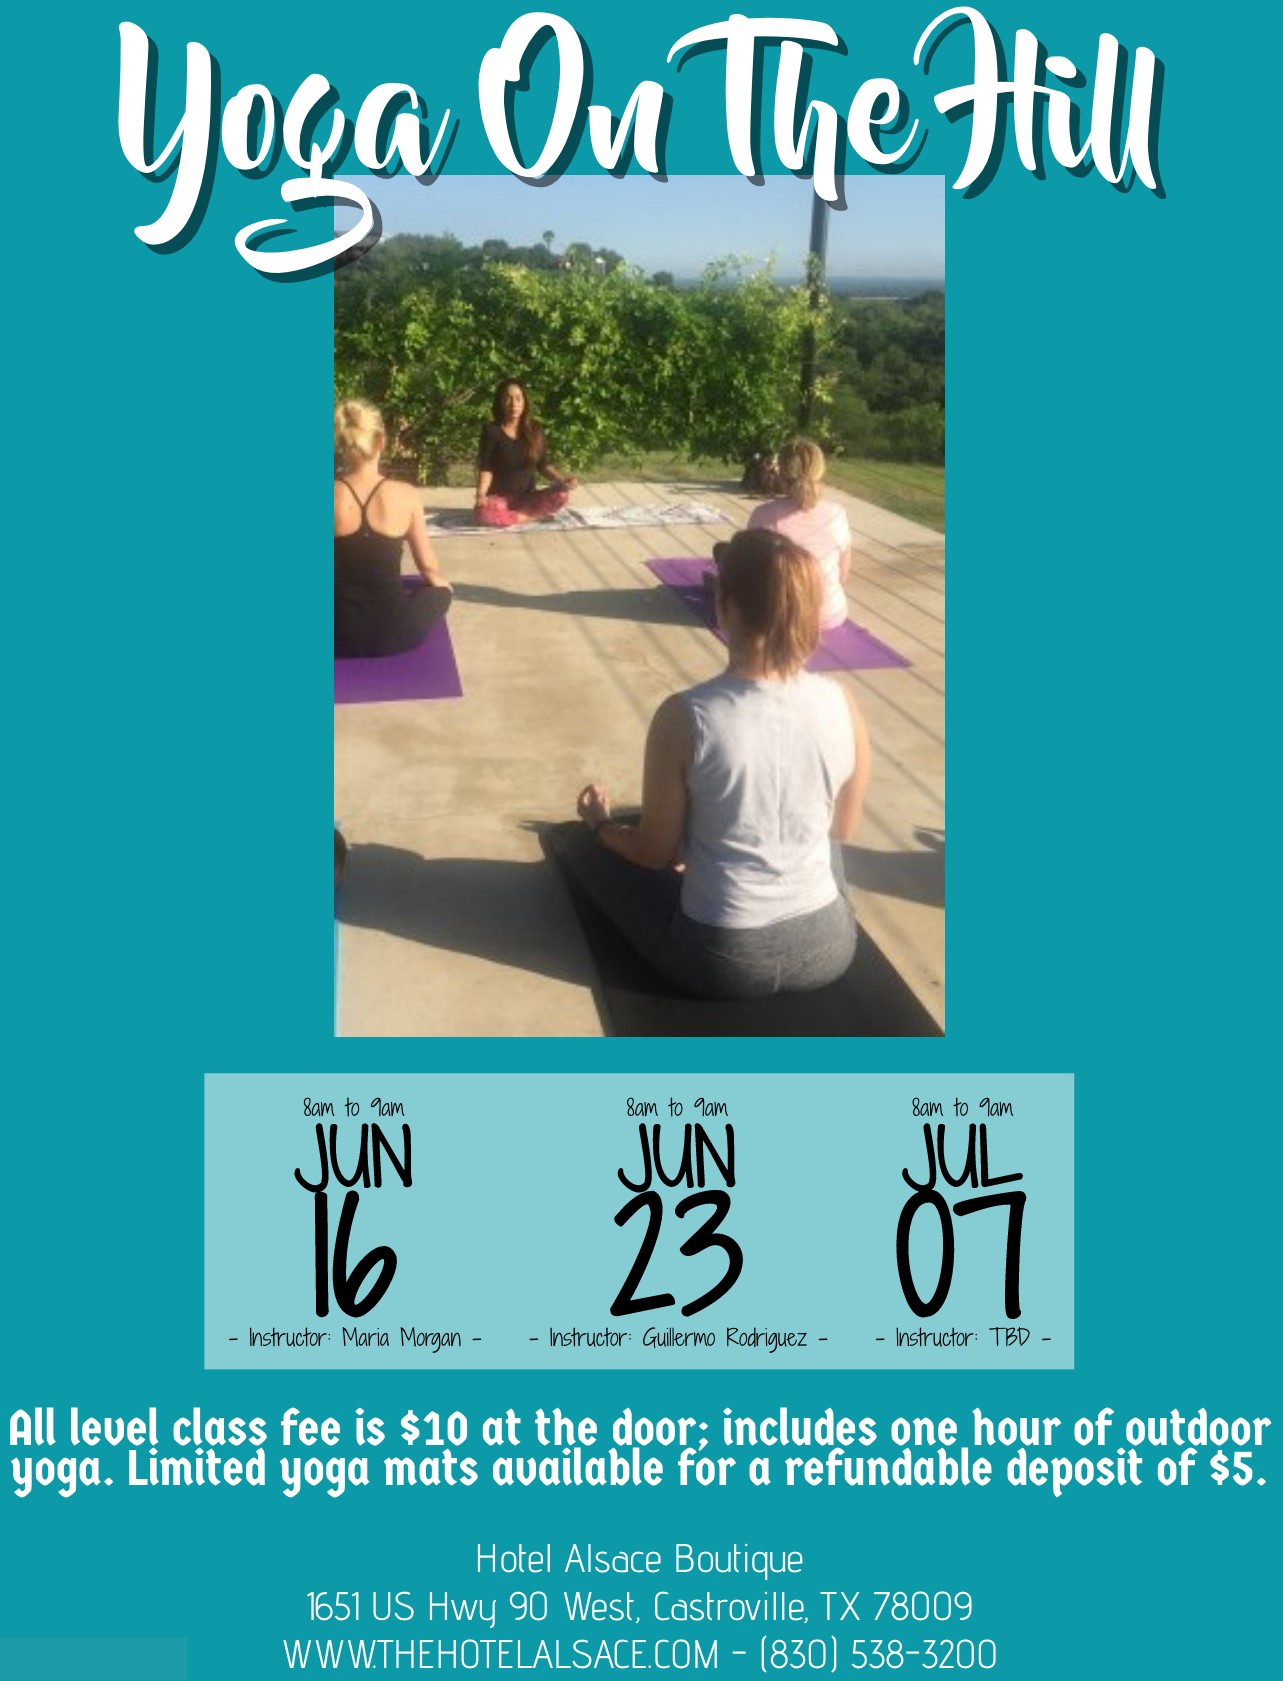 Yoga on the Hill